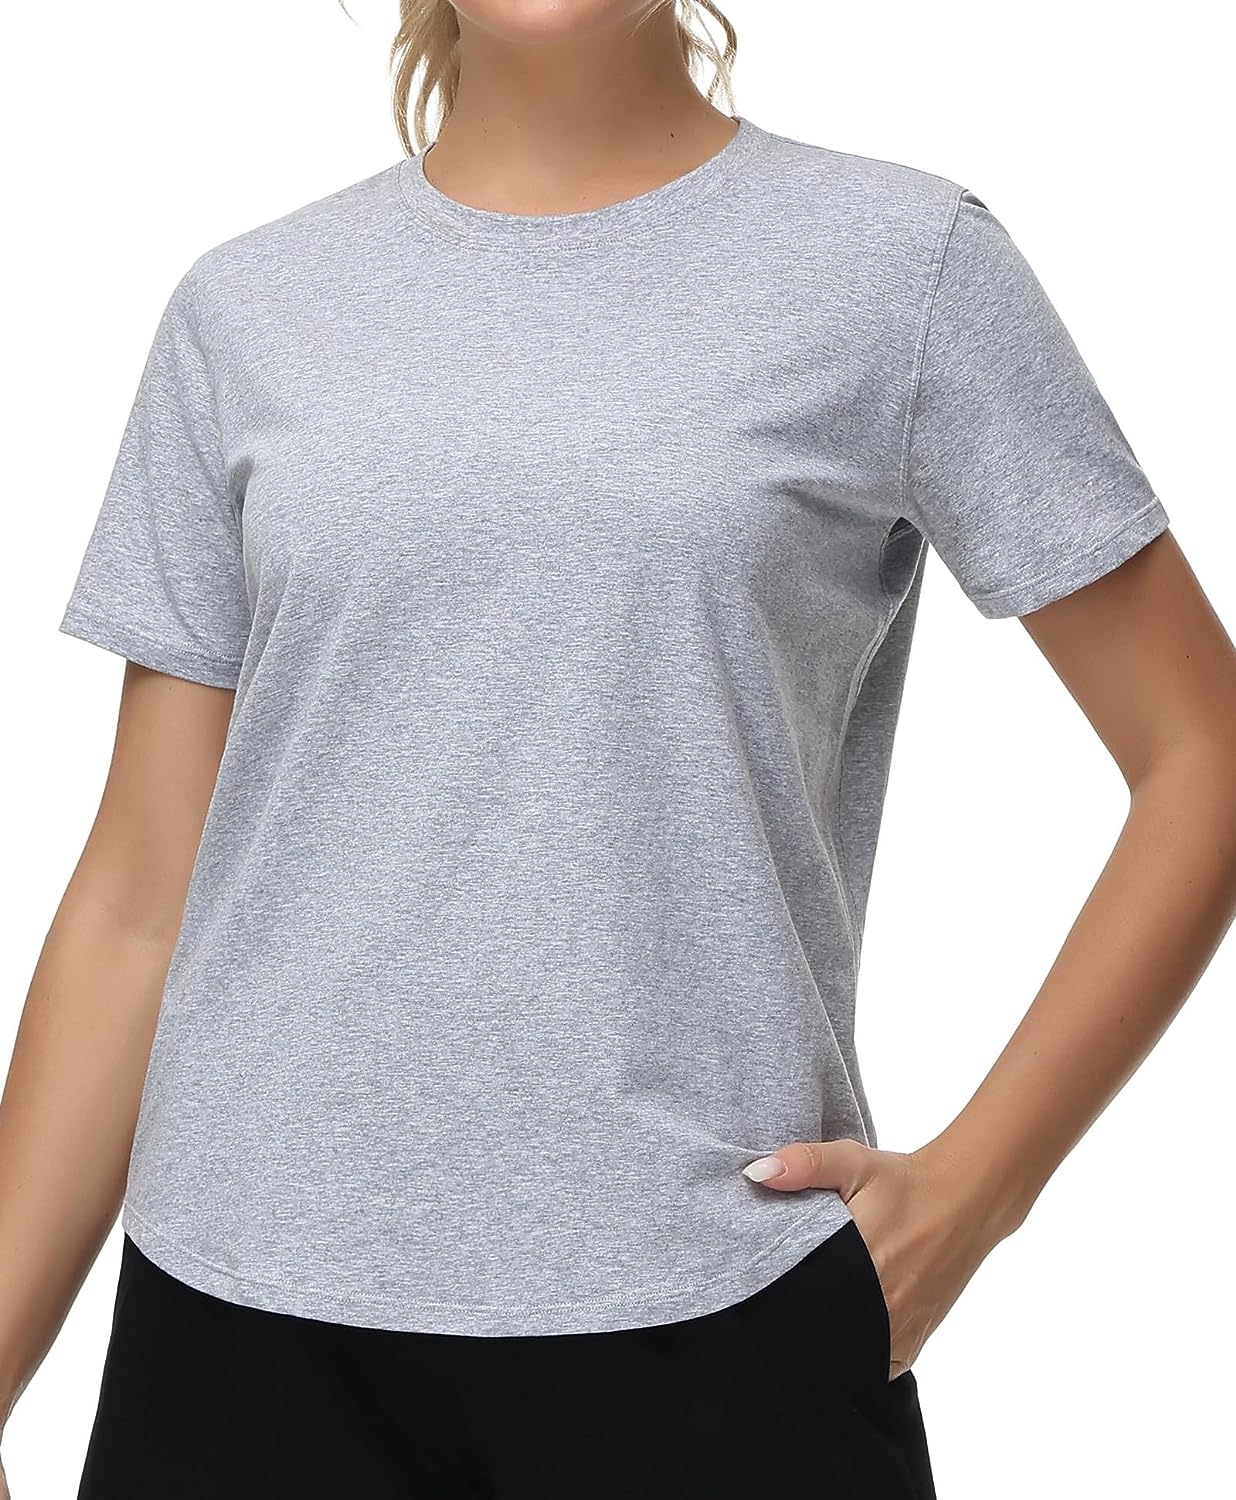 THE GYM PEOPLE Women's Short Sleeve Workout Shirts Breathable Yoga